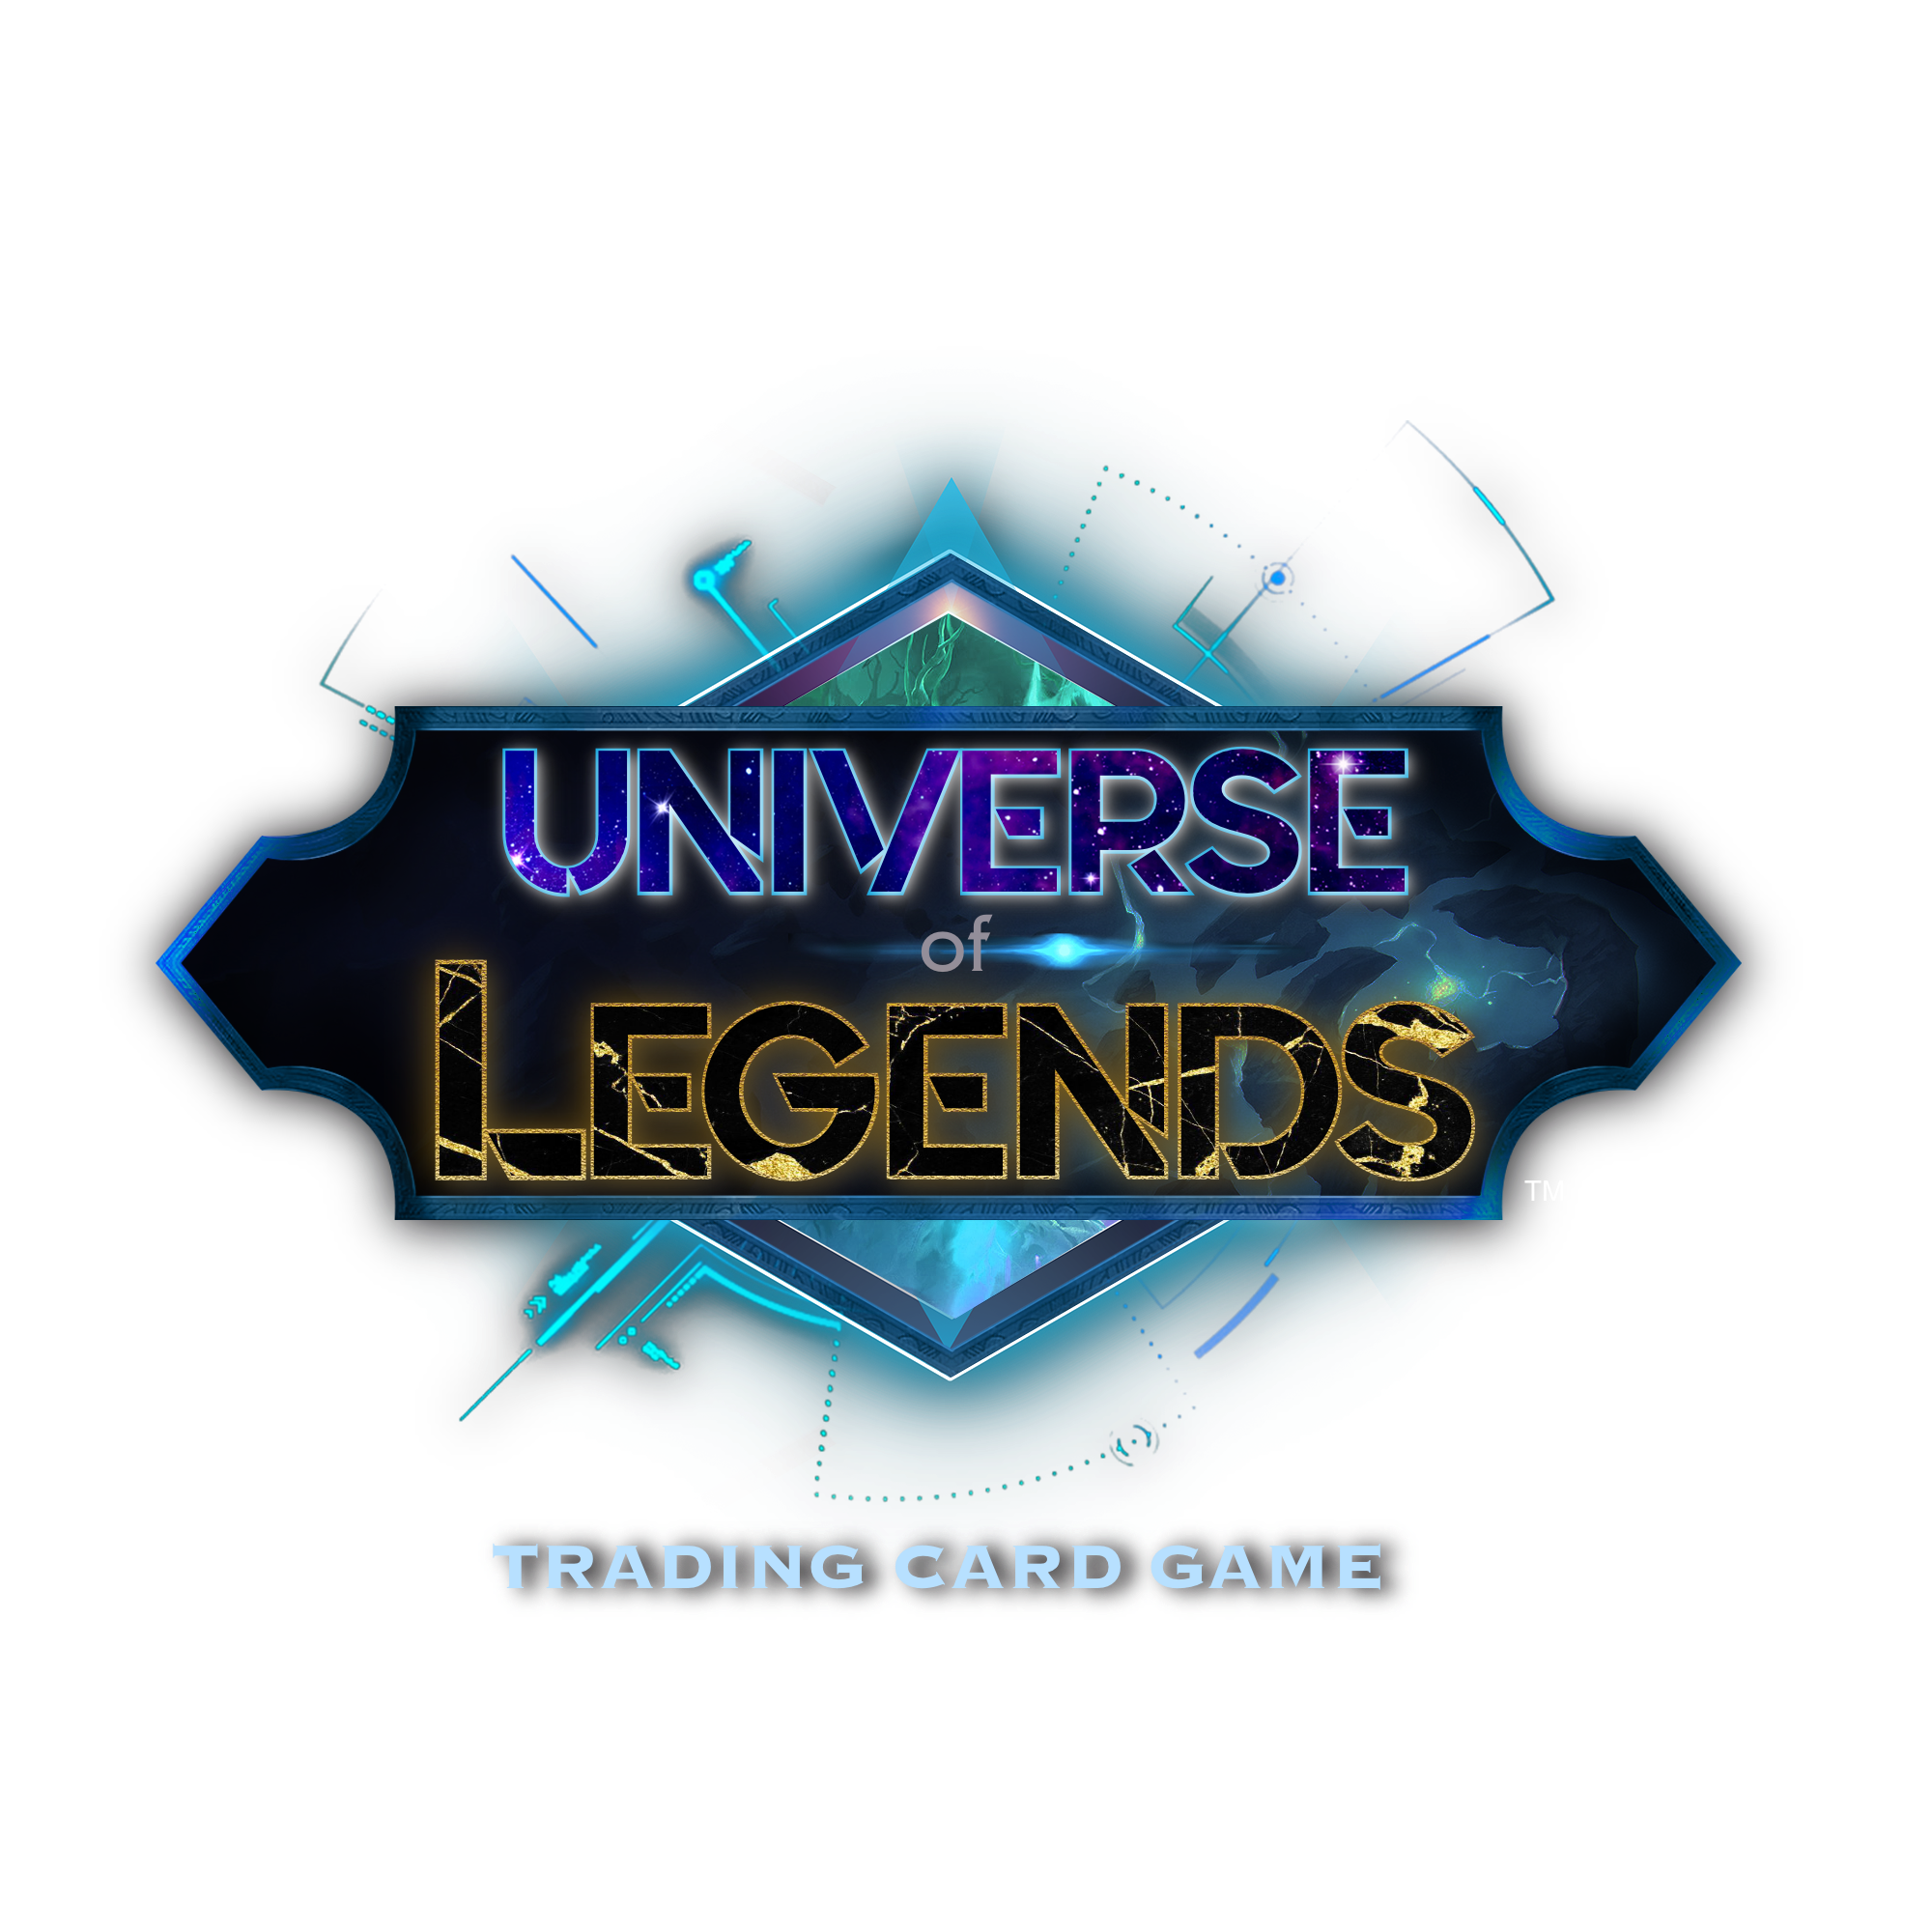 UNIVERSES OF LEGENDS TRADING CARD GAME